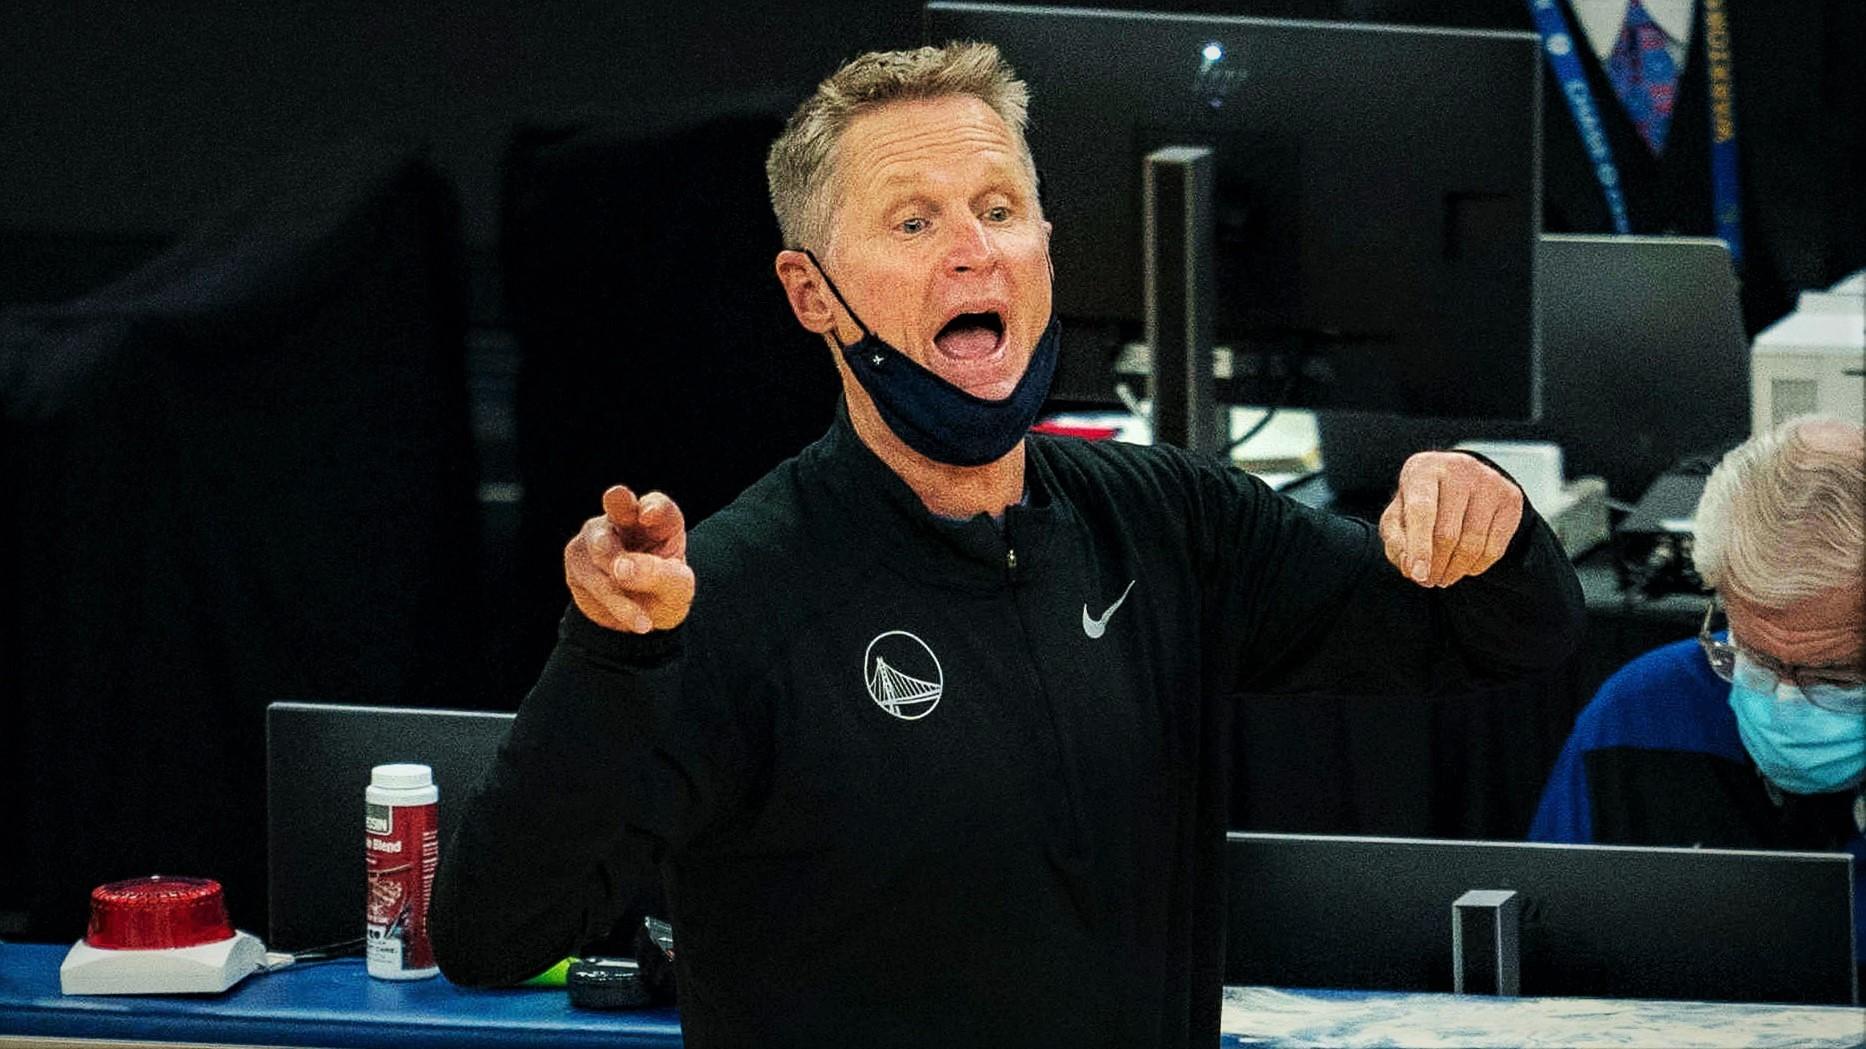 Jan 4, 2021; San Francisco, California, USA; Golden State Warriors head coach Steve Kerr calls out from the sidelines during the first quarter against the Sacramento Kings at Chase Center. Mandatory Credit: Neville E. Guard-USA TODAY Sports / © Neville E. Guard-USA TODAY Sports